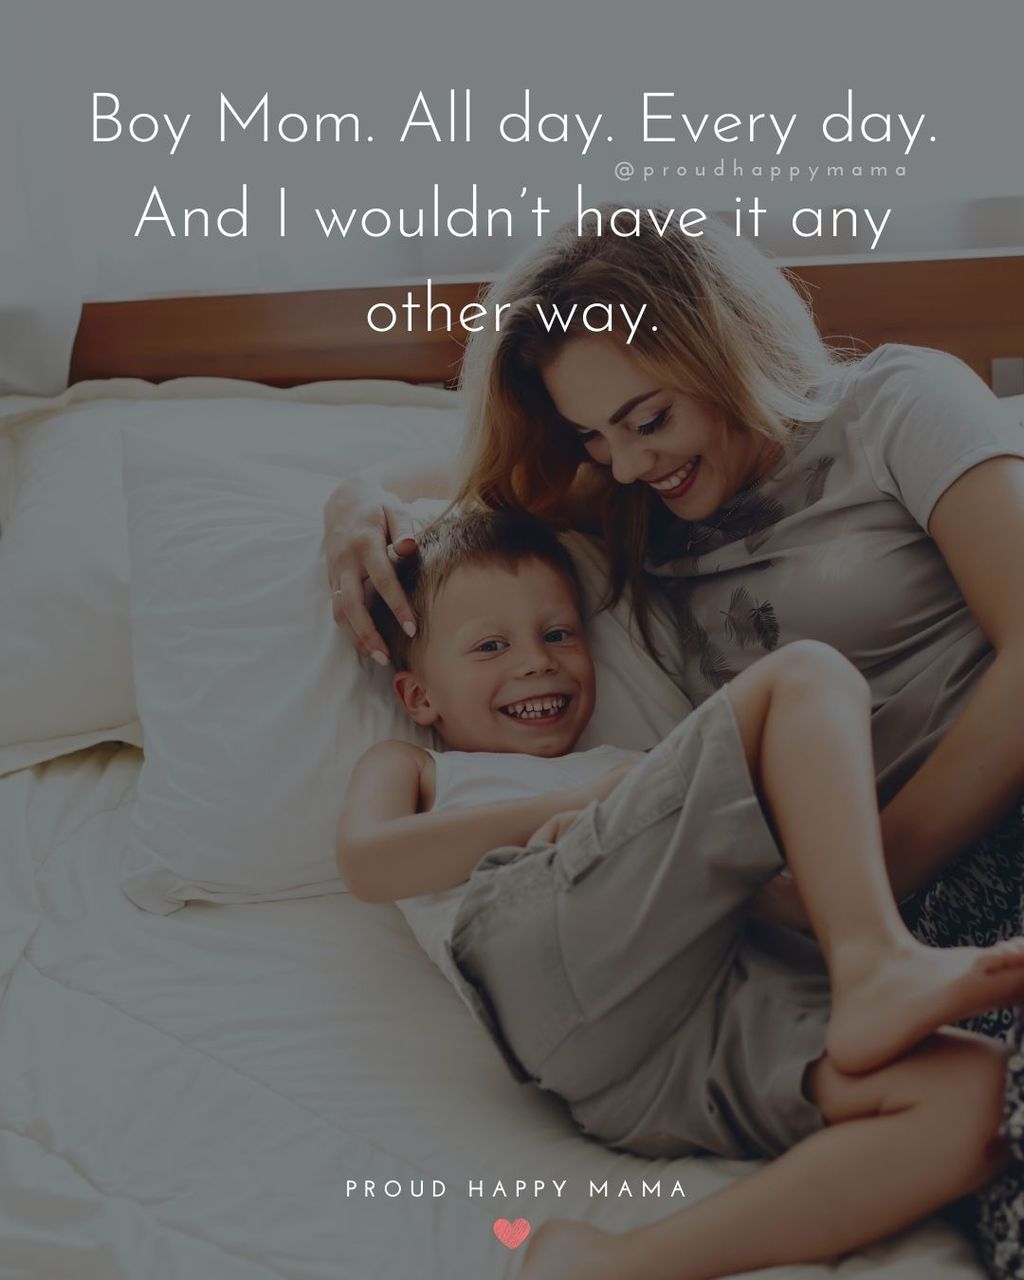 Boy Mom Quotes - Boy Mom. All day. Every day. And I wouldn’t have it any other way.